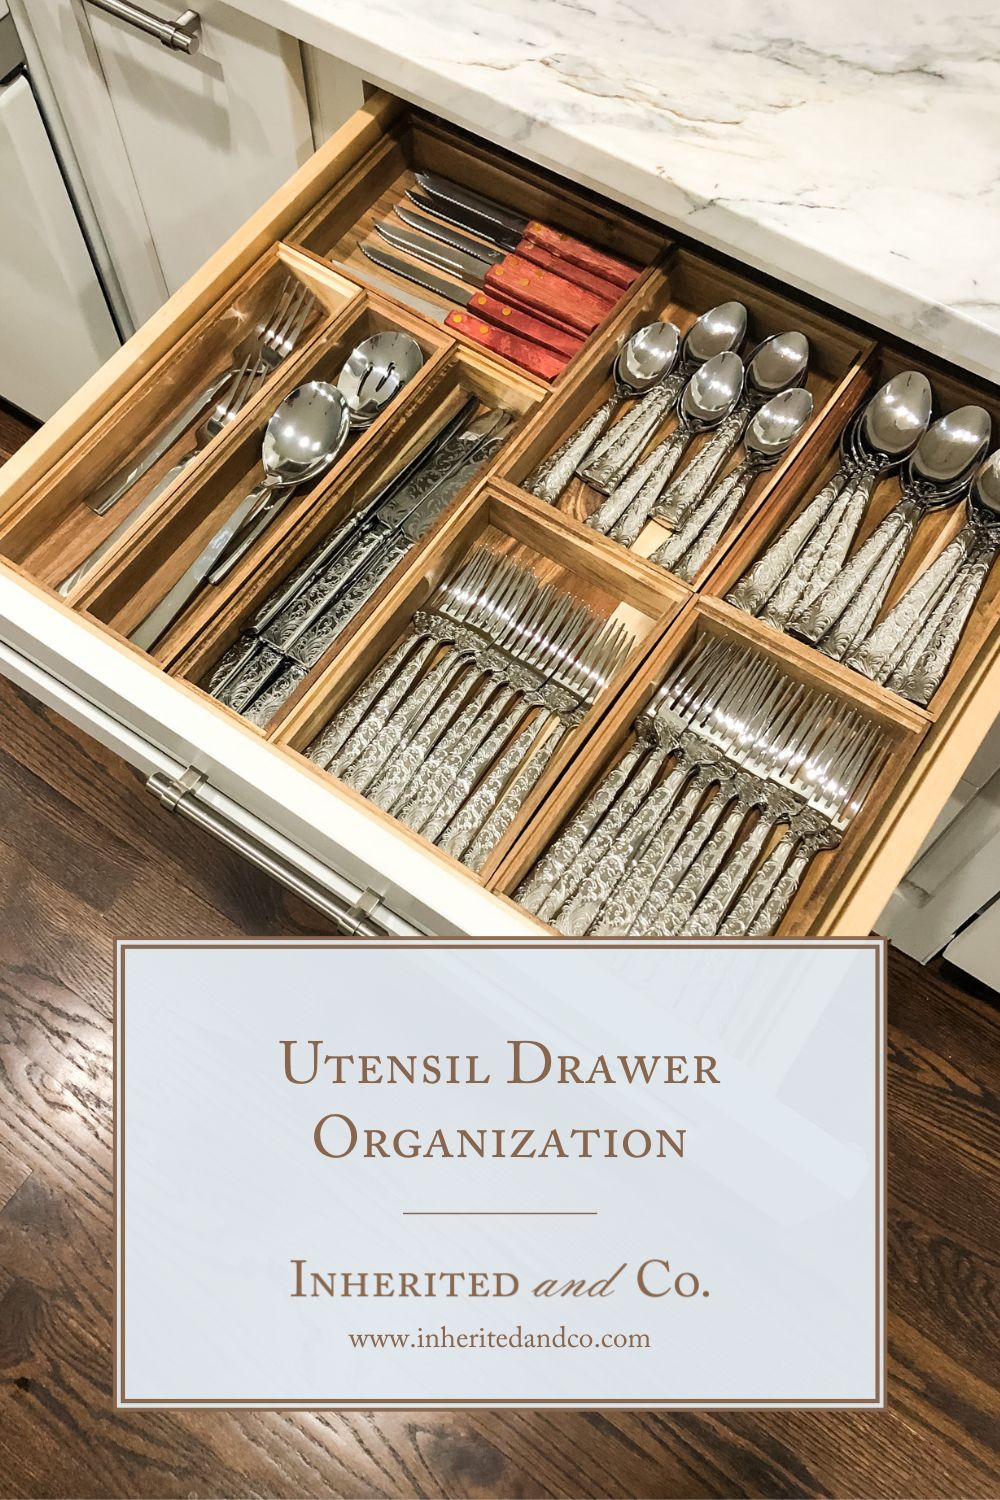 organized kitchen drawer in the background with text that says utensil drawer organization